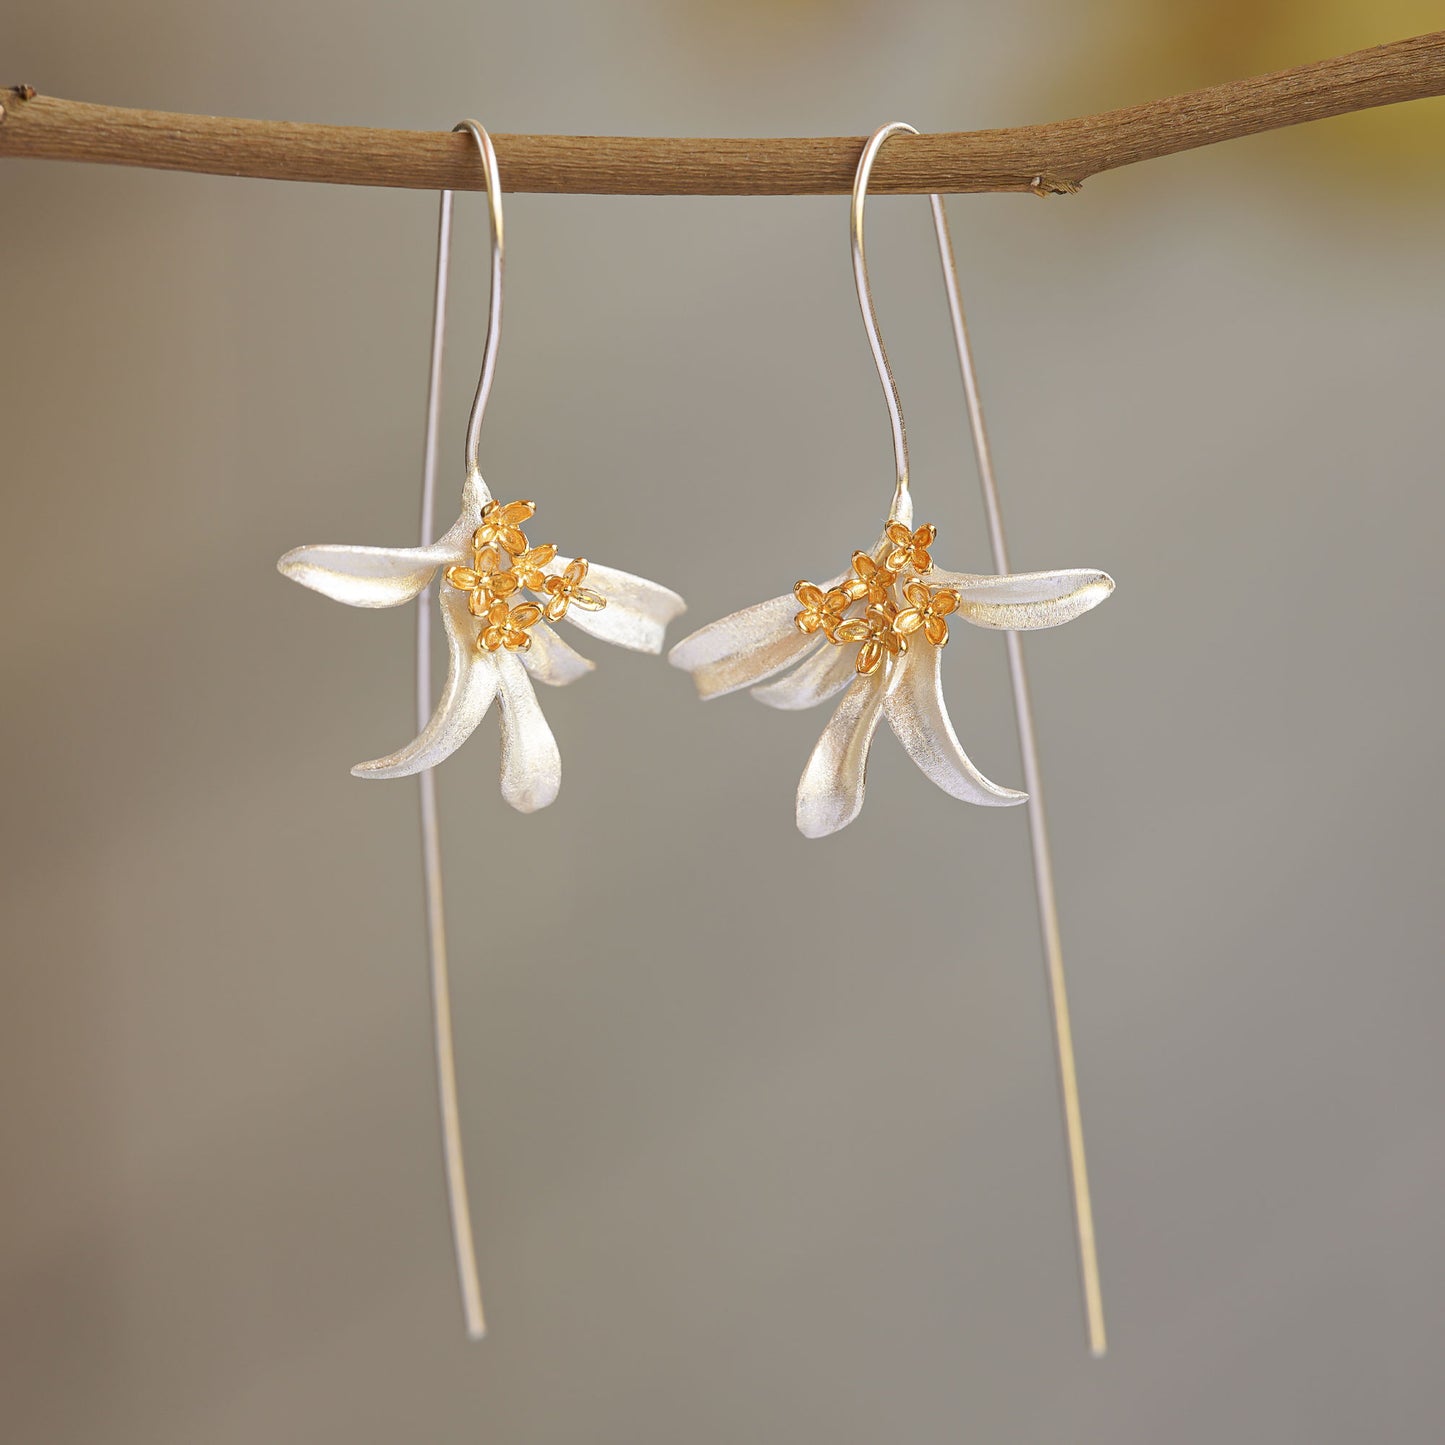 A pair of osmanthus earrings hanging from a tree branch